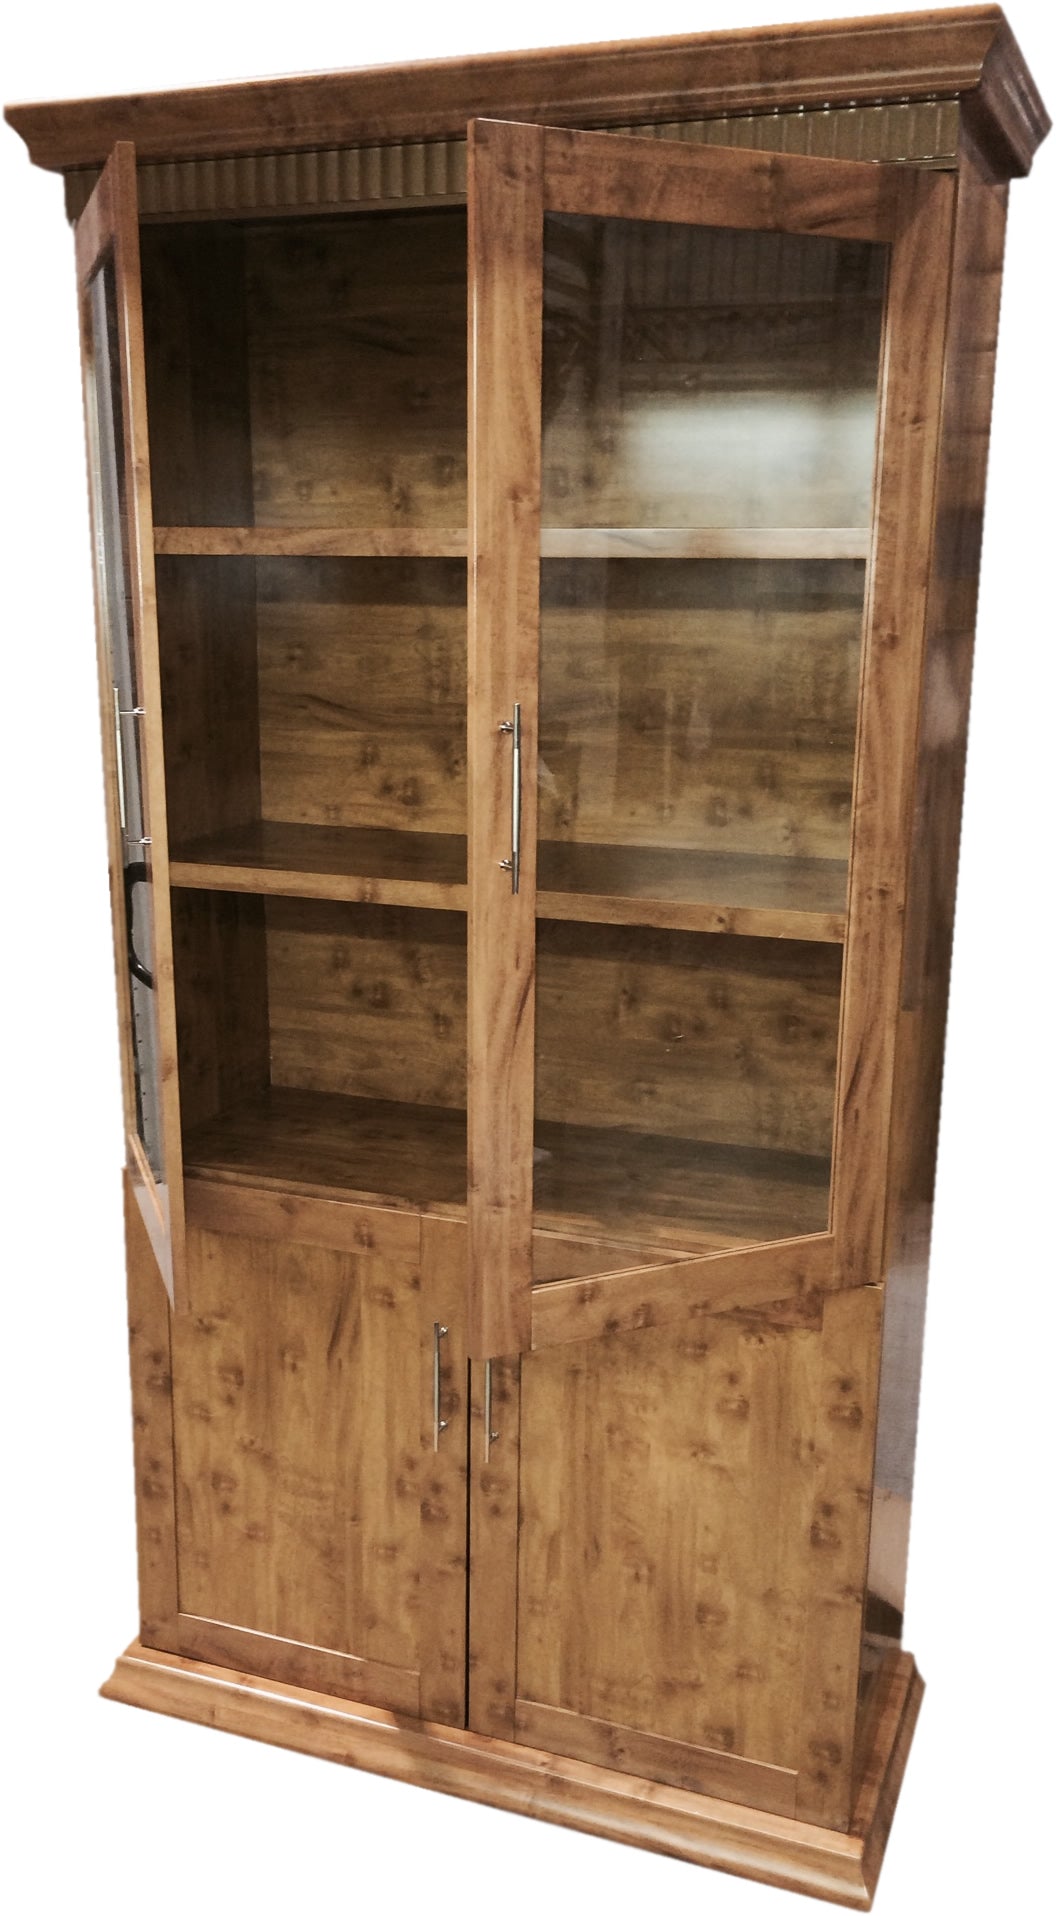 Yew Luxury Bookcase 2 Doors Wide DES-1862A-2DR UK